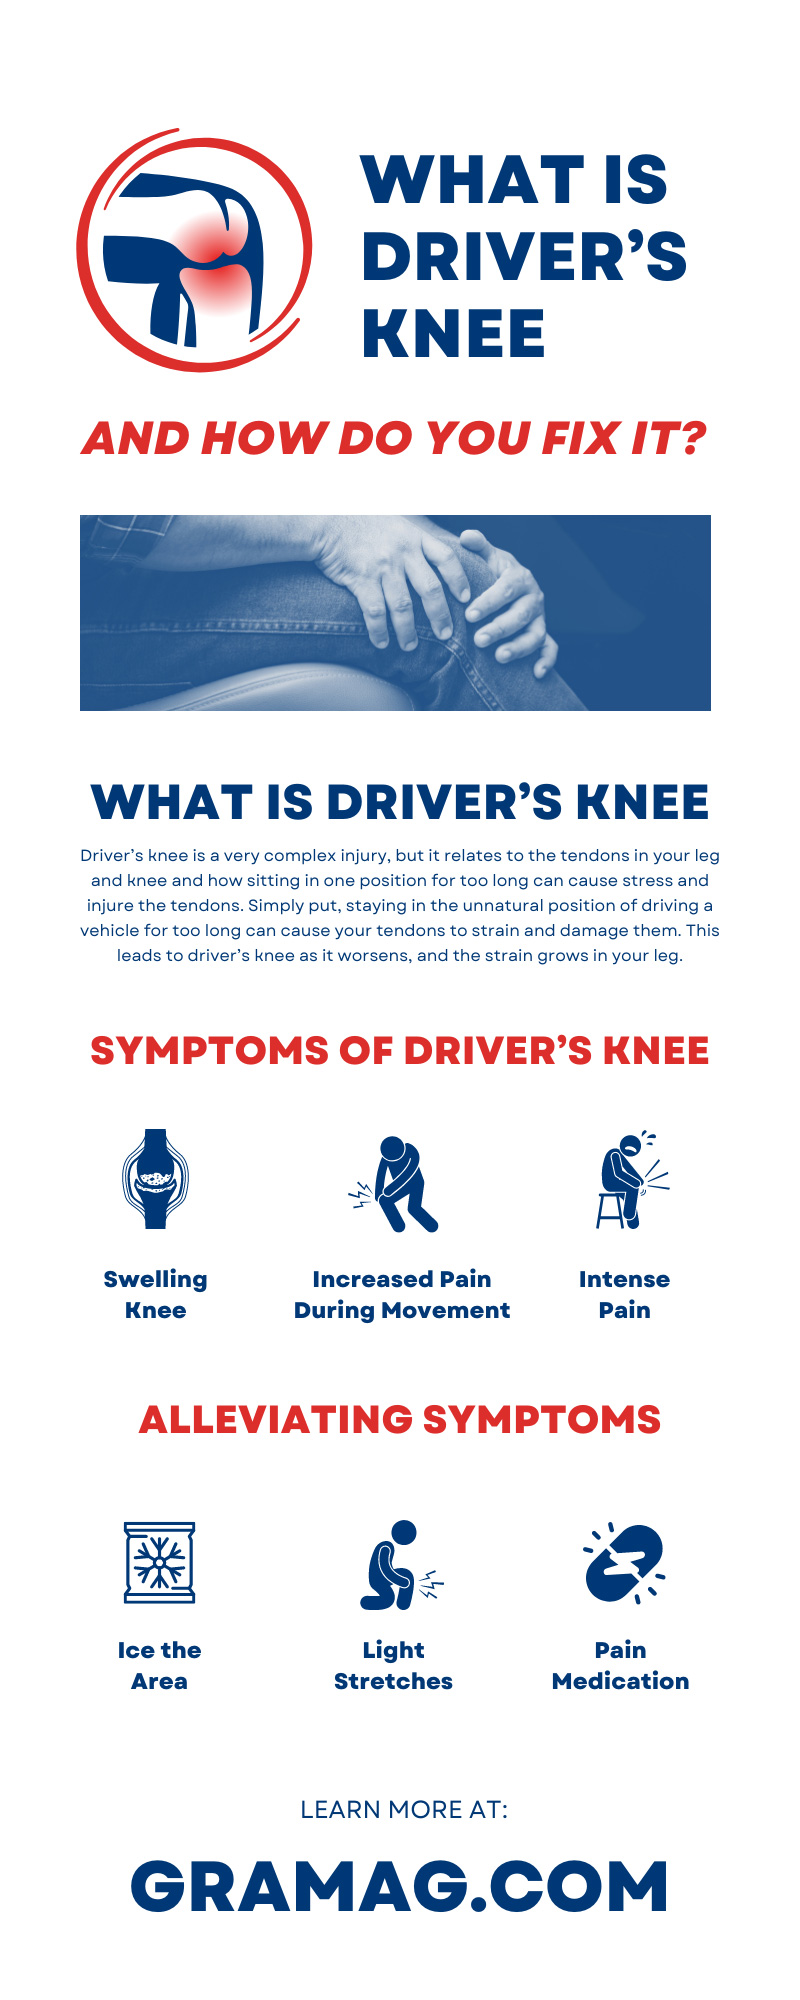 What Is Driver’s Knee and How Do You Fix It?